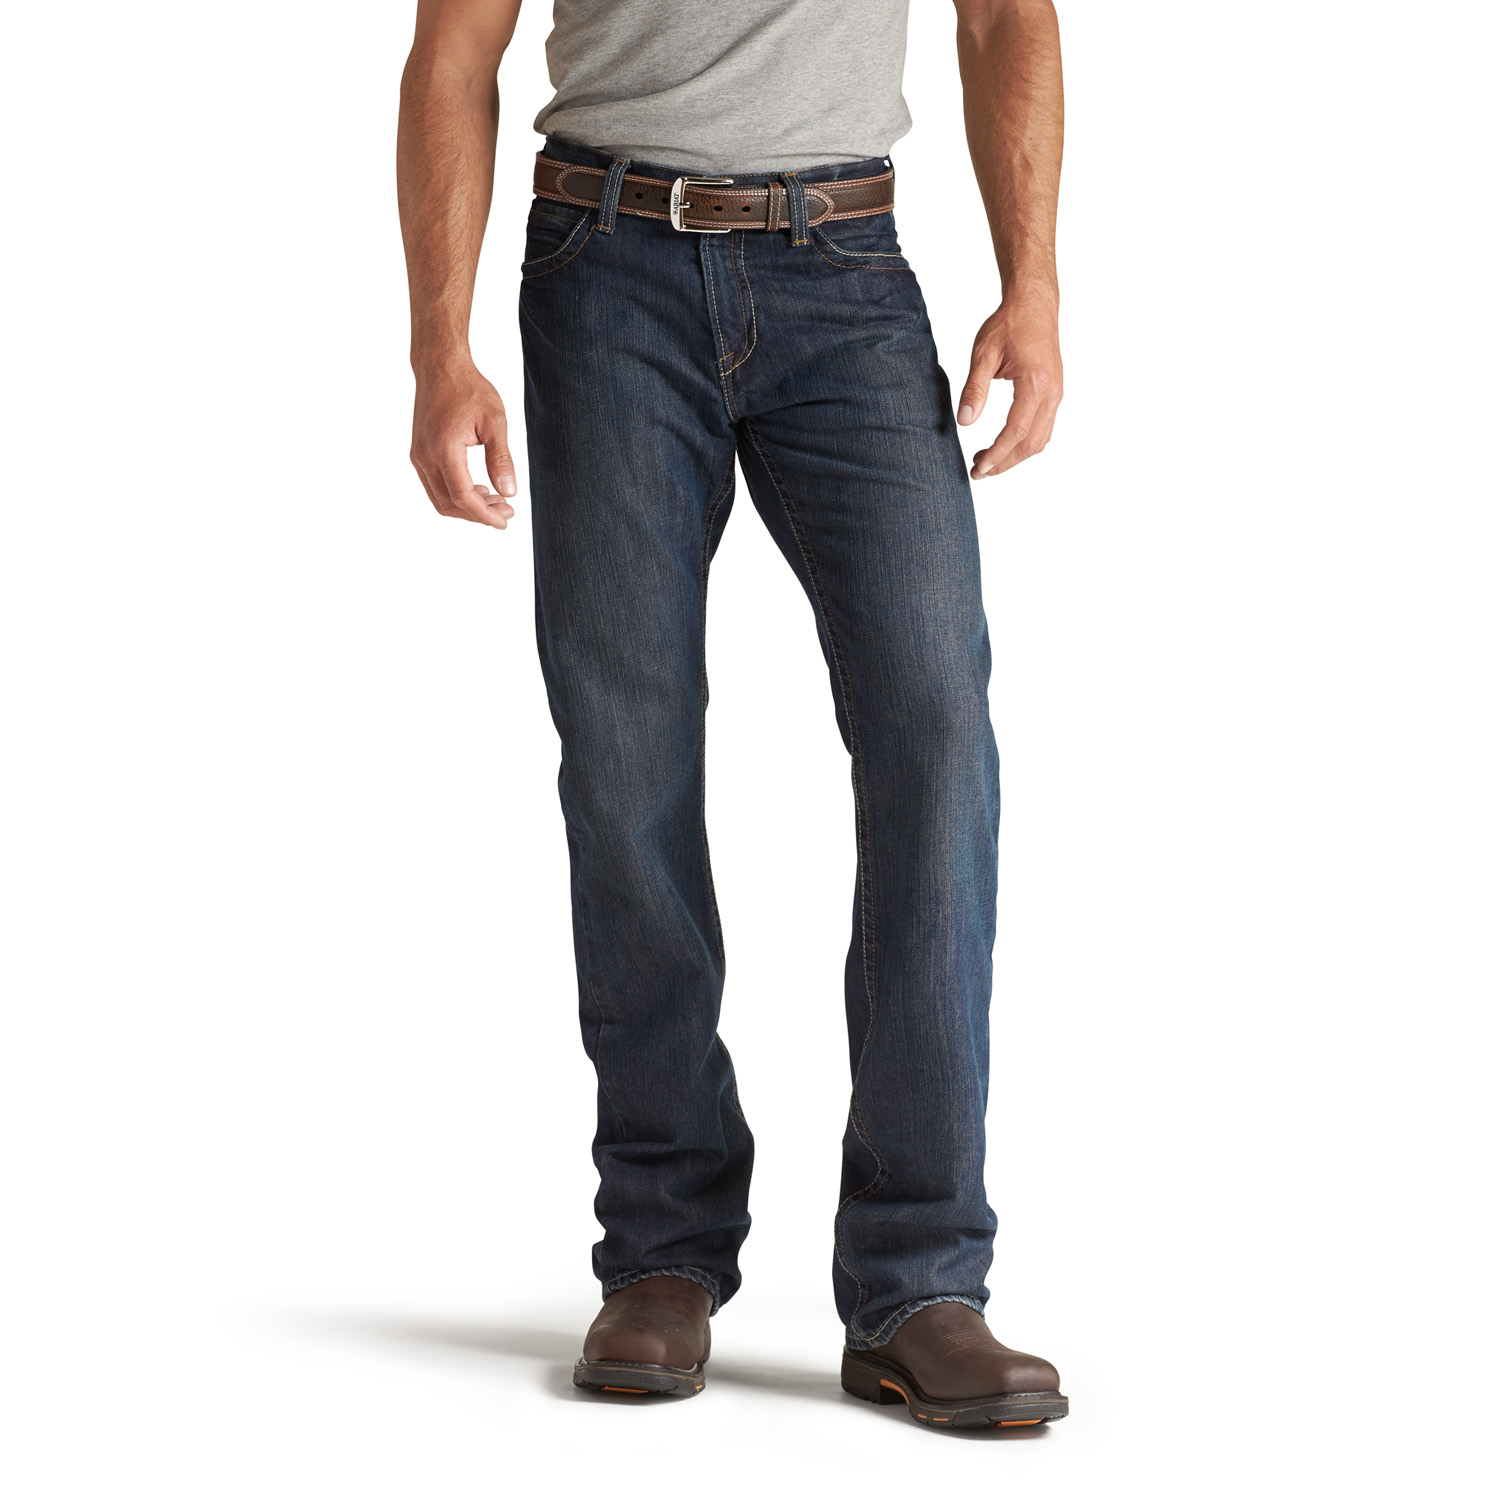 bootcut work jeans